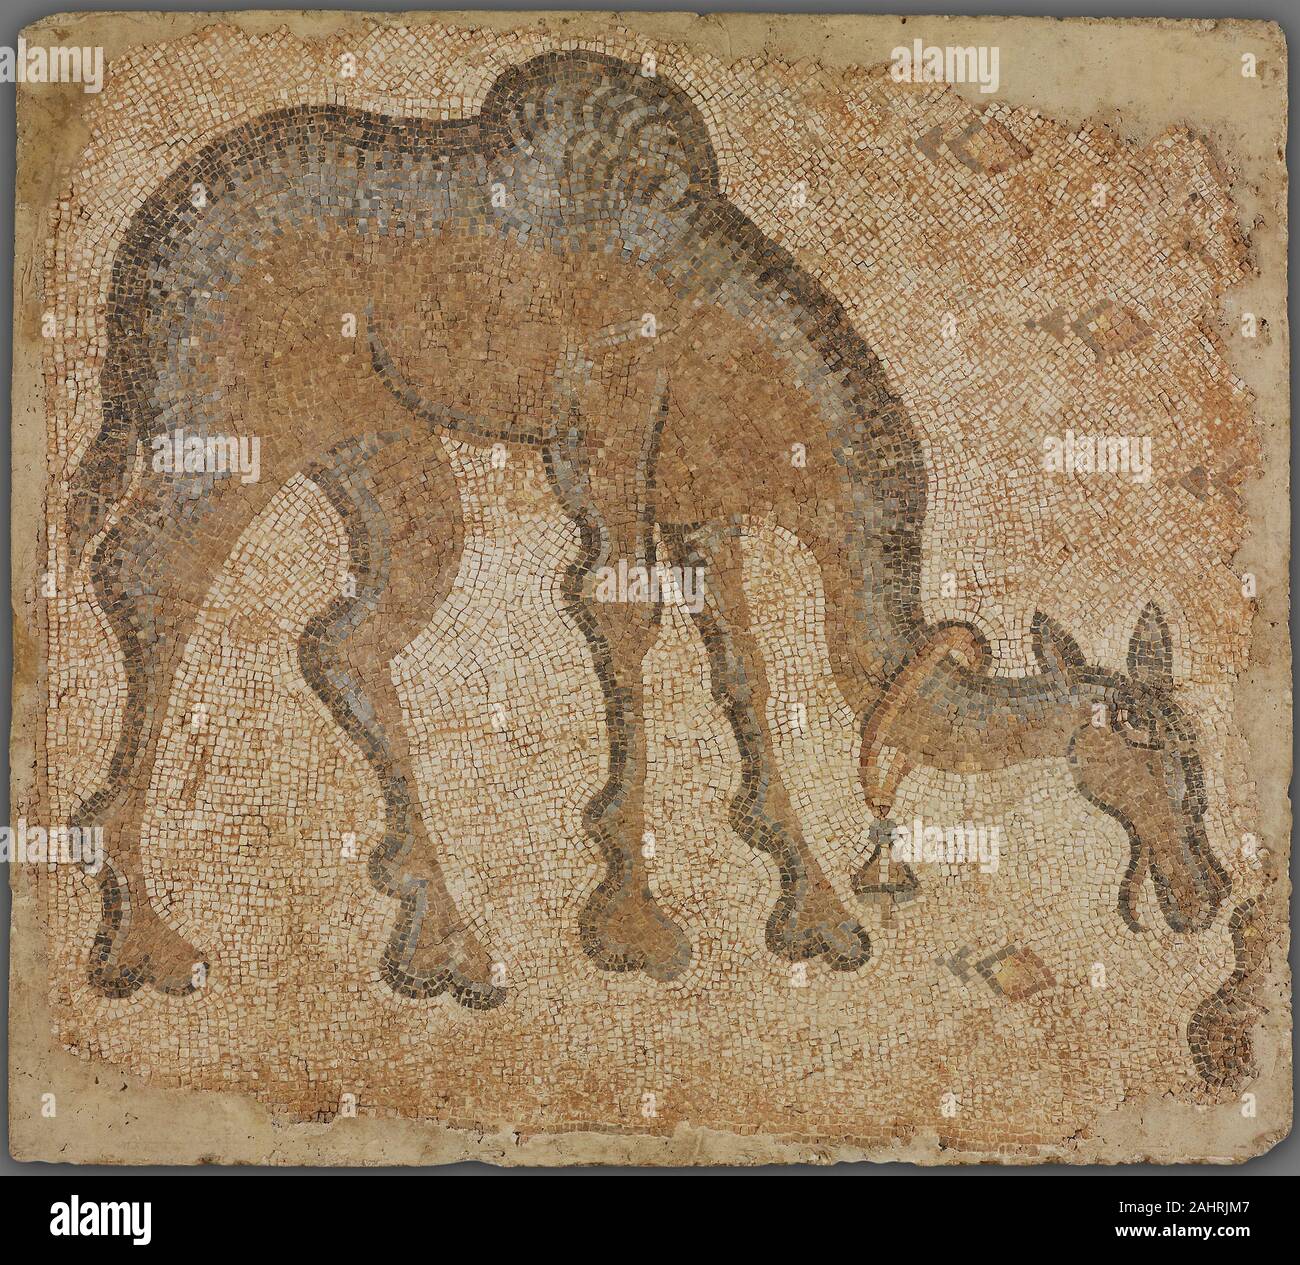 Byzantine. Mosaic Fragment with Grazing Camel. 301 AD–500 AD. Byzantine  Empire. Stone in mortar This image of a grazing camel probably came from a  larger composition with other animals that decorated the